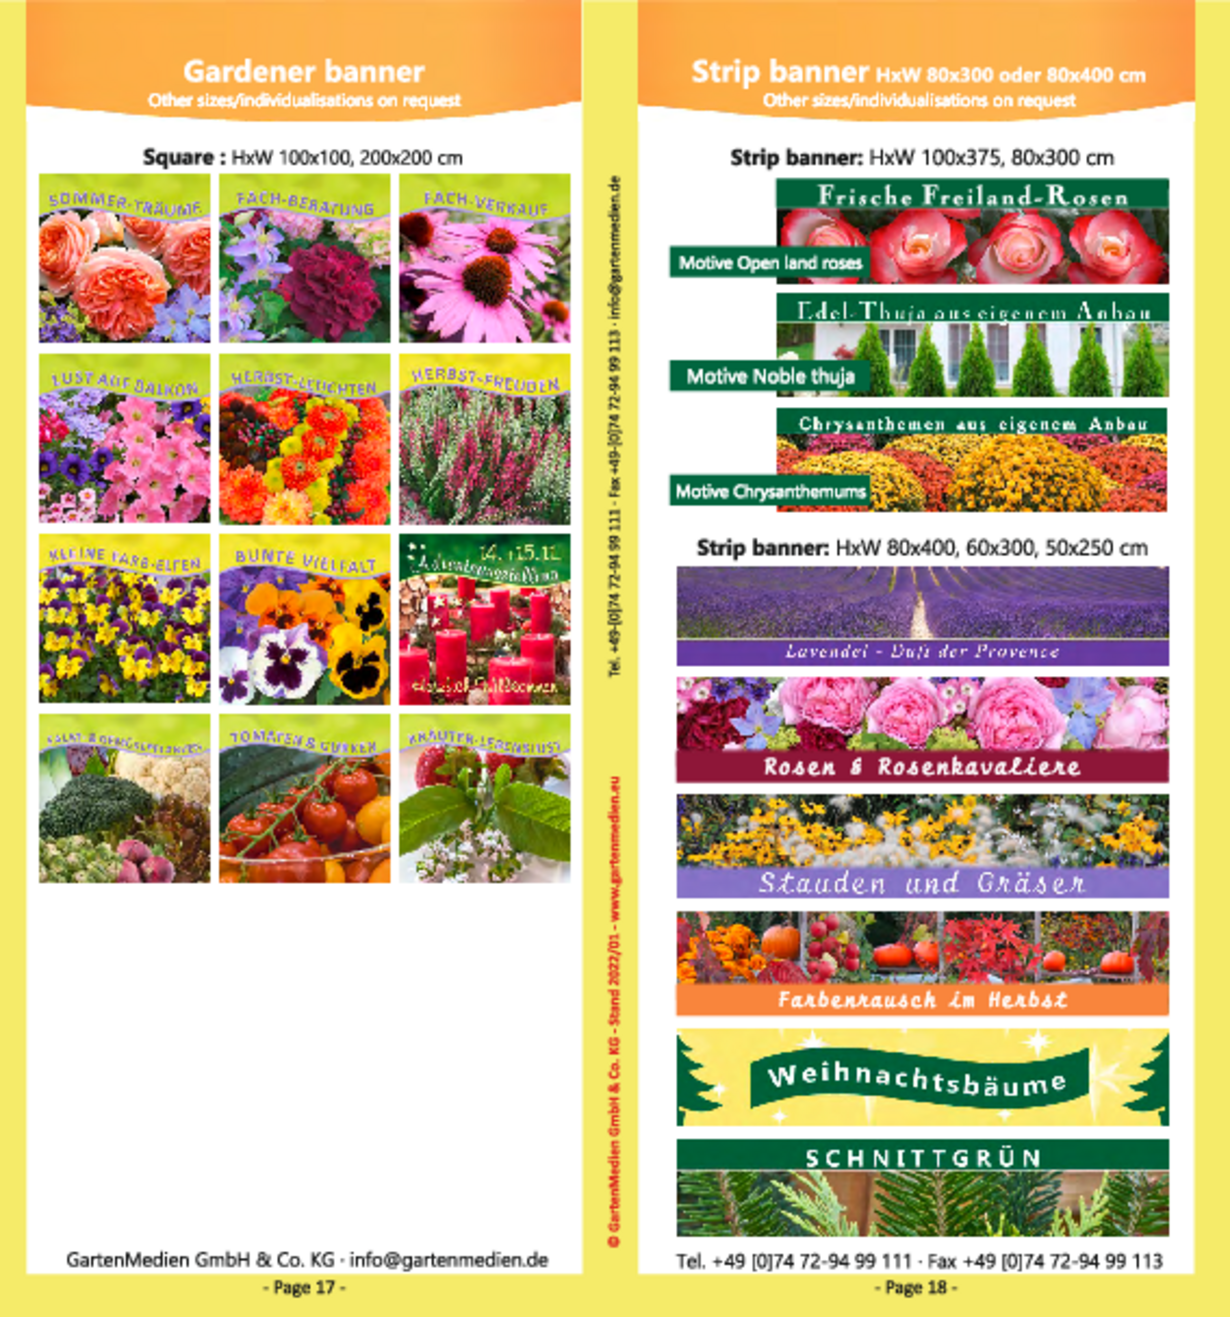 Horticulturist banners and stripe banners